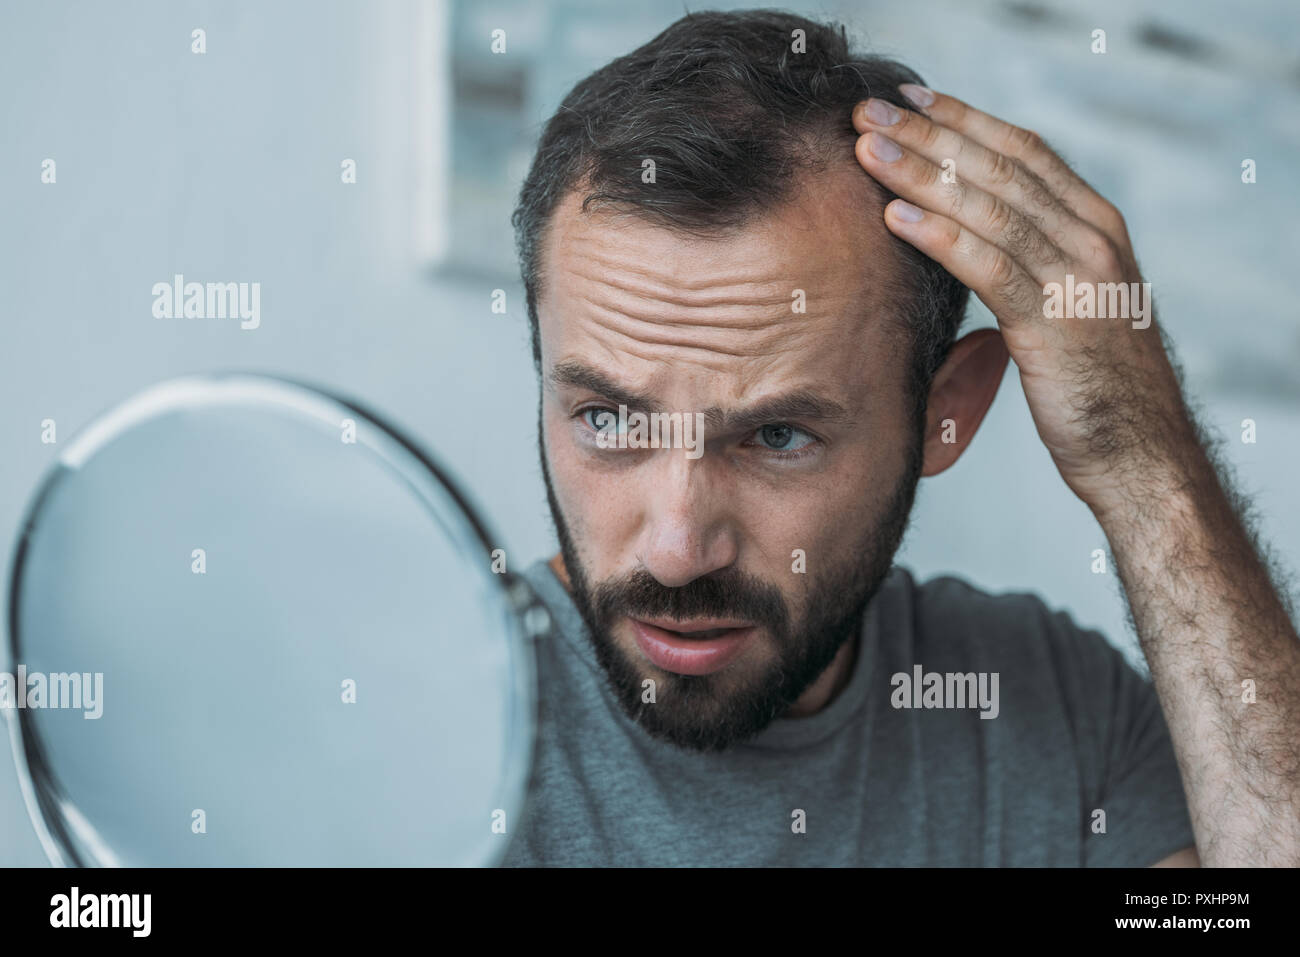 upset middle aged man with alopecia looking at mirror, hair loss concept Stock Photo